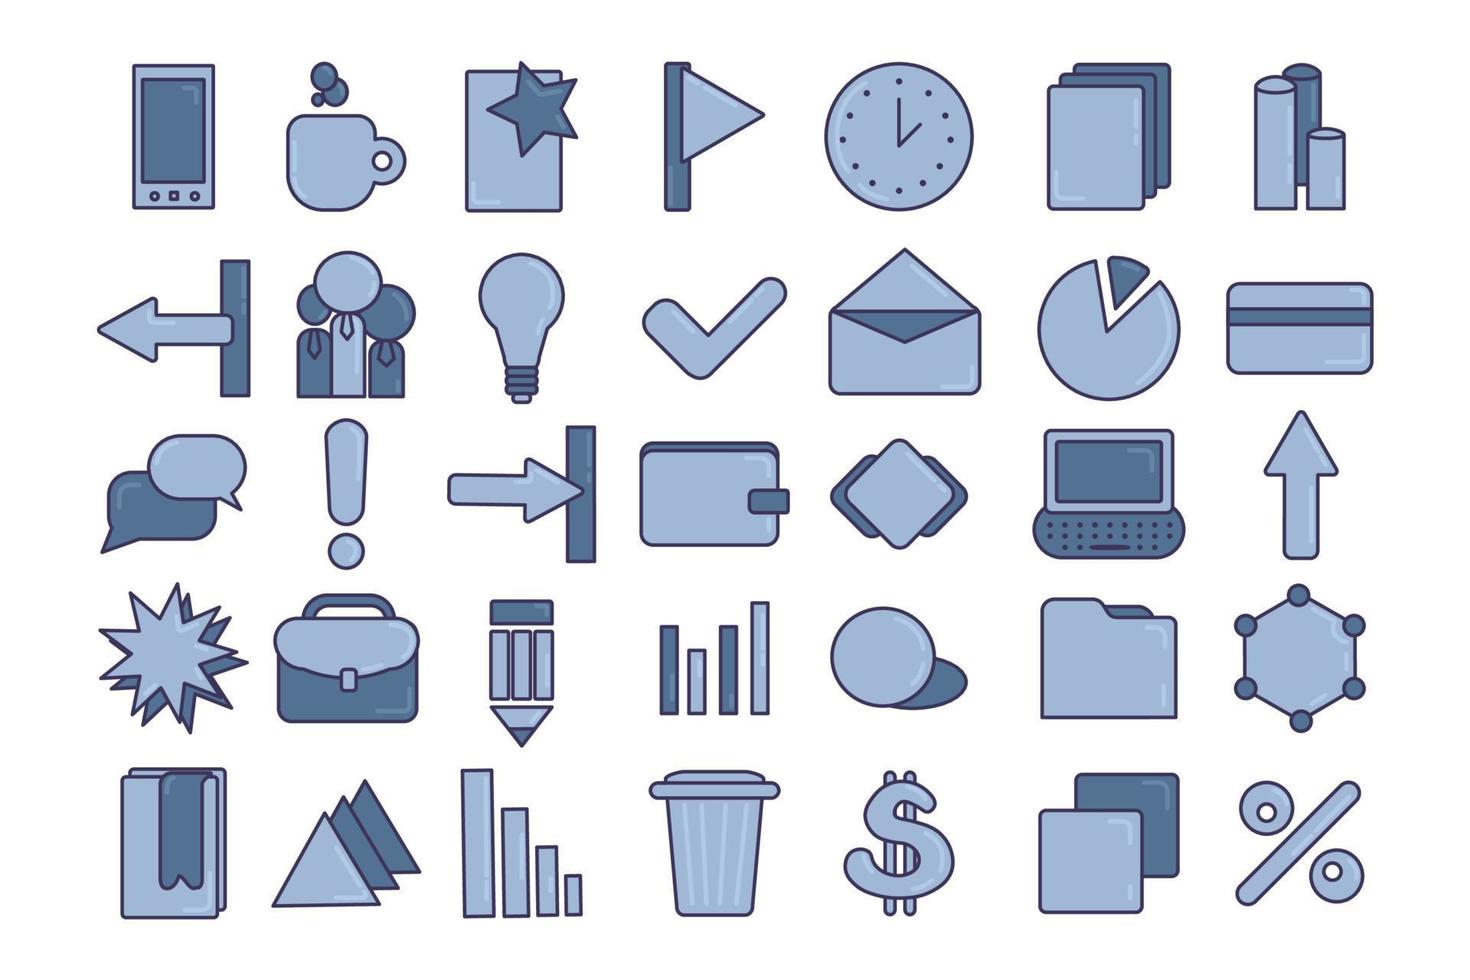 Business, programming, management, internet connection, social network, computing, information icon set. Teamwork thin line icon collection. Start up and Development vector